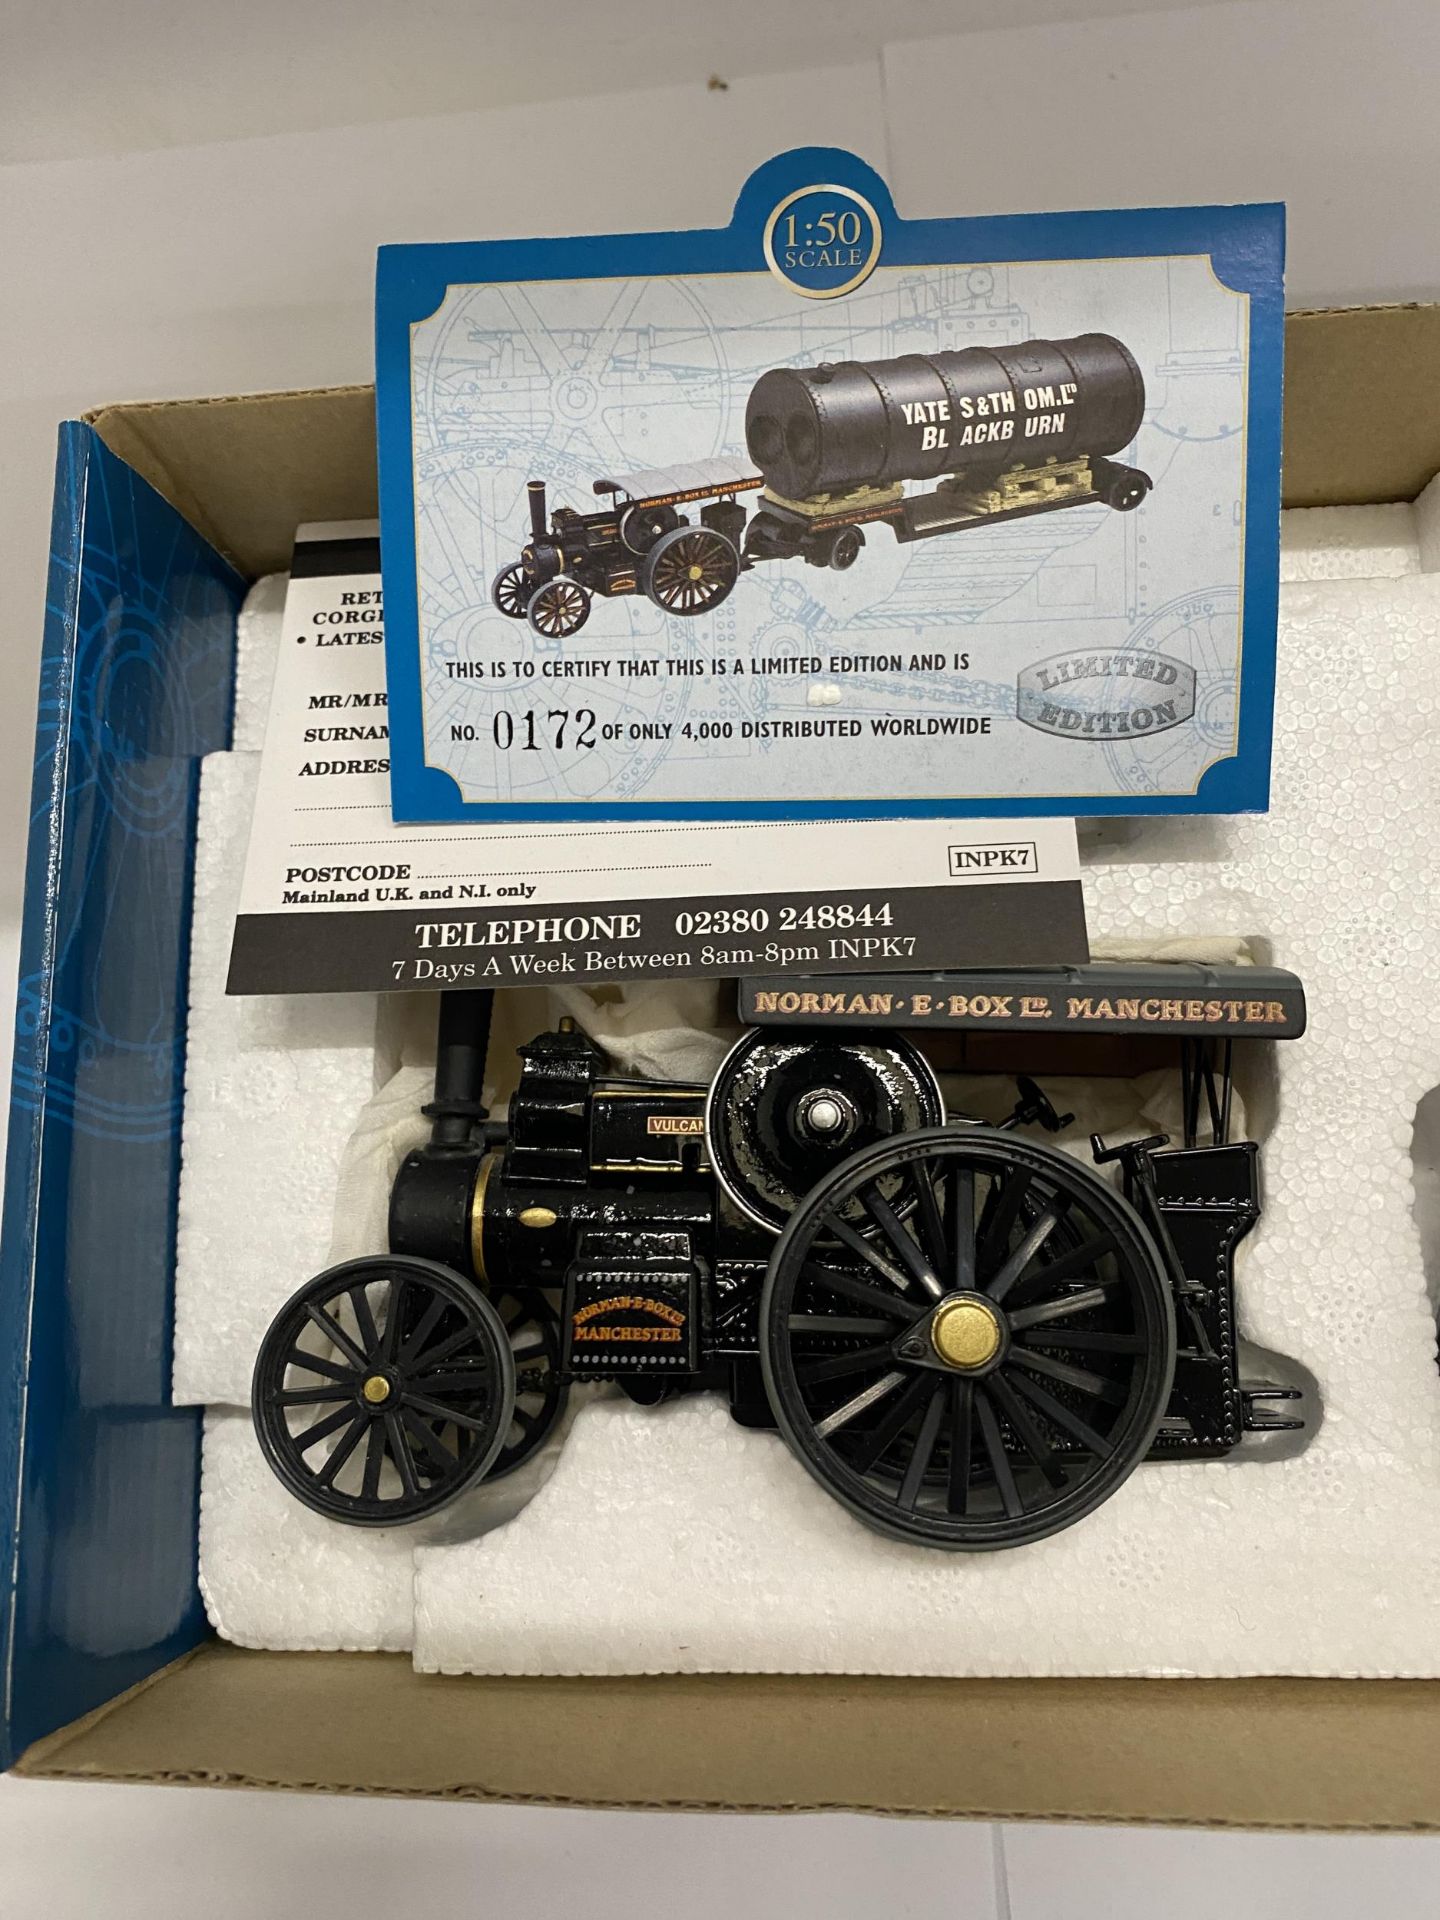 A CORGI 'DIBNAH'S CHOICE' TRACTION ENGINE, LOW LOADER AND BOILER, AS NEW IN BOX - Image 4 of 4